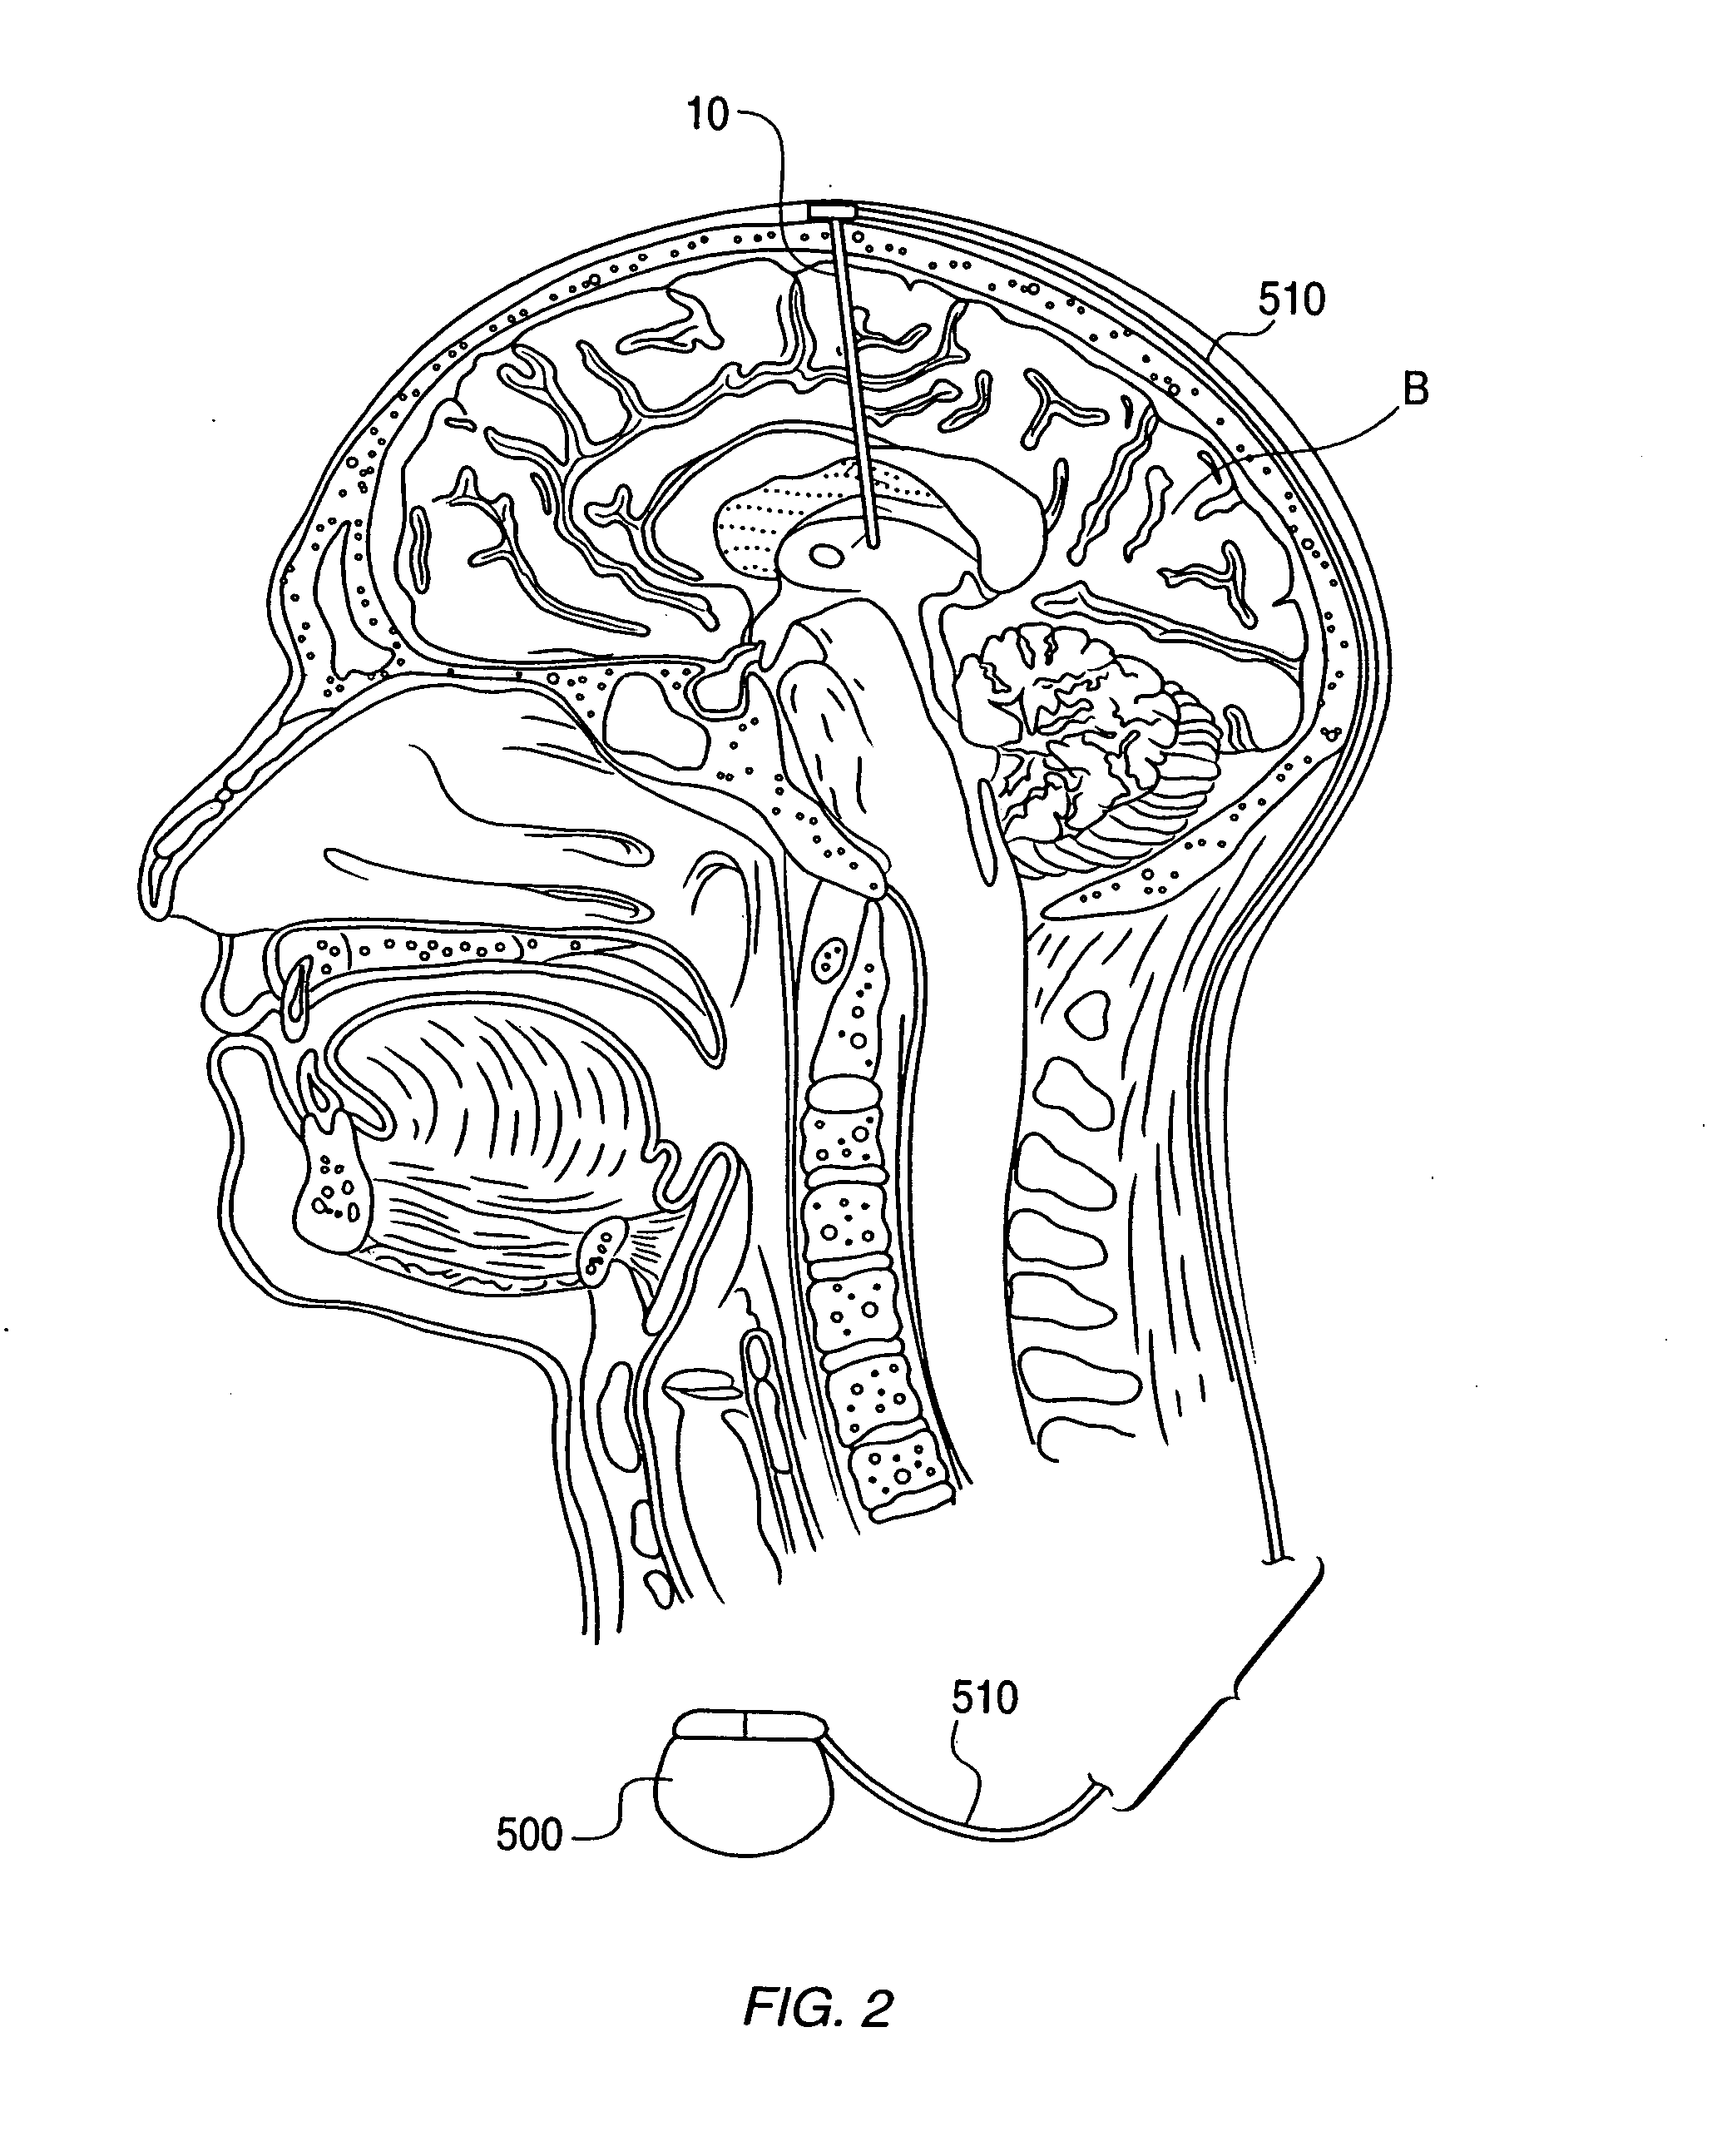 Neural stimulation delivery device with independently moveable delivery structures